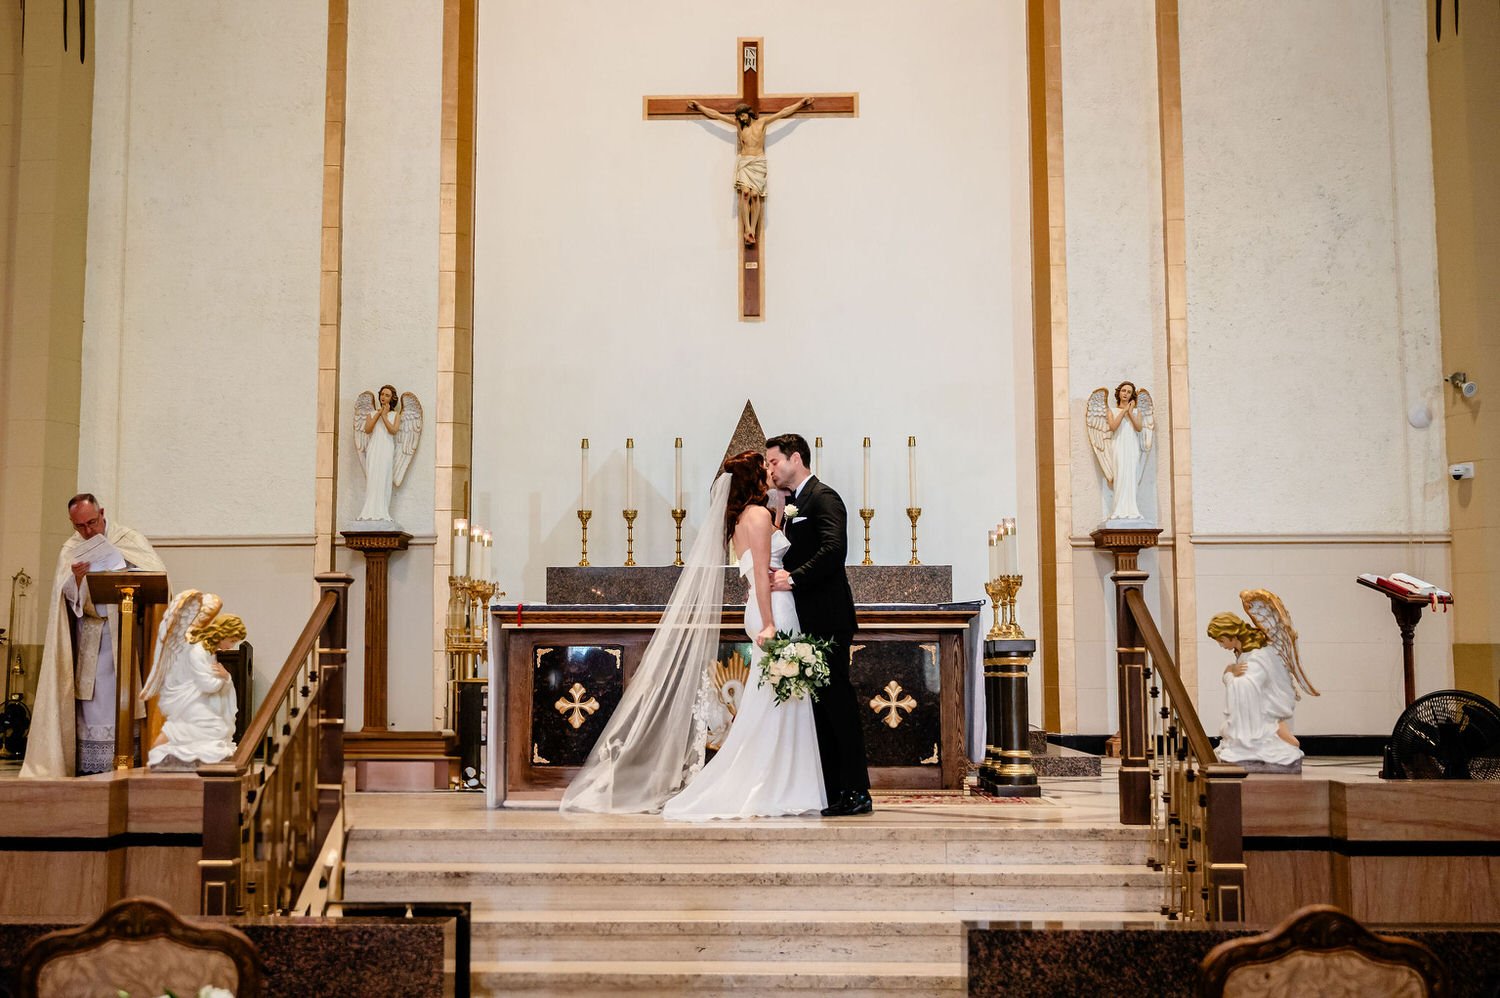 photograph from a wedding ceremony at blessed sacrament church in ottawa